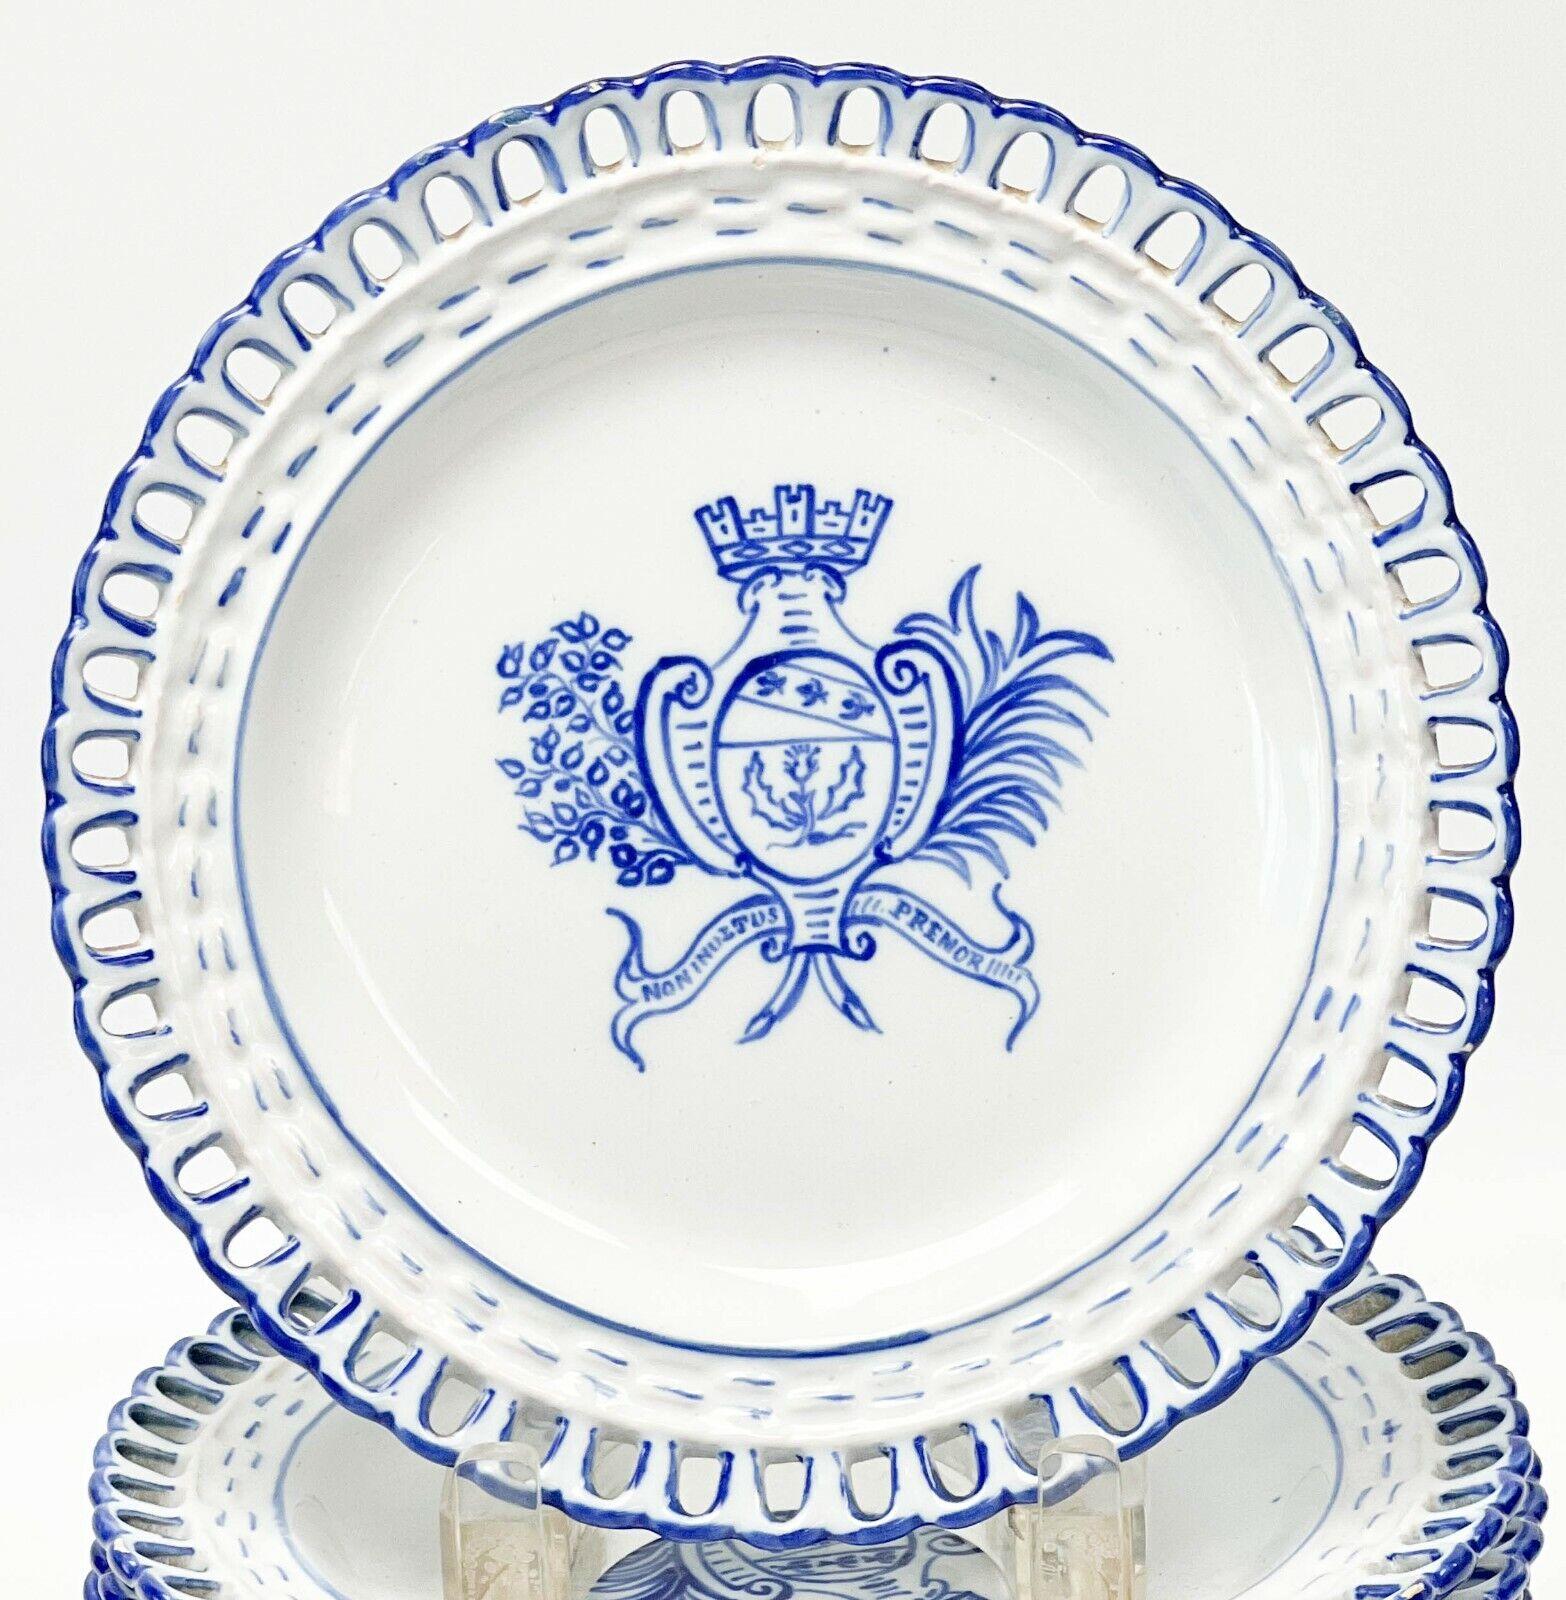 13 (12+ a spare) Emile Galle France Reinemer Nancy Faience reticulated porcelain plates circa 1880. A white ground with blue decoration to the center featuring the coat of arms of the town of Nancy, France. The crest features a crown over a shield